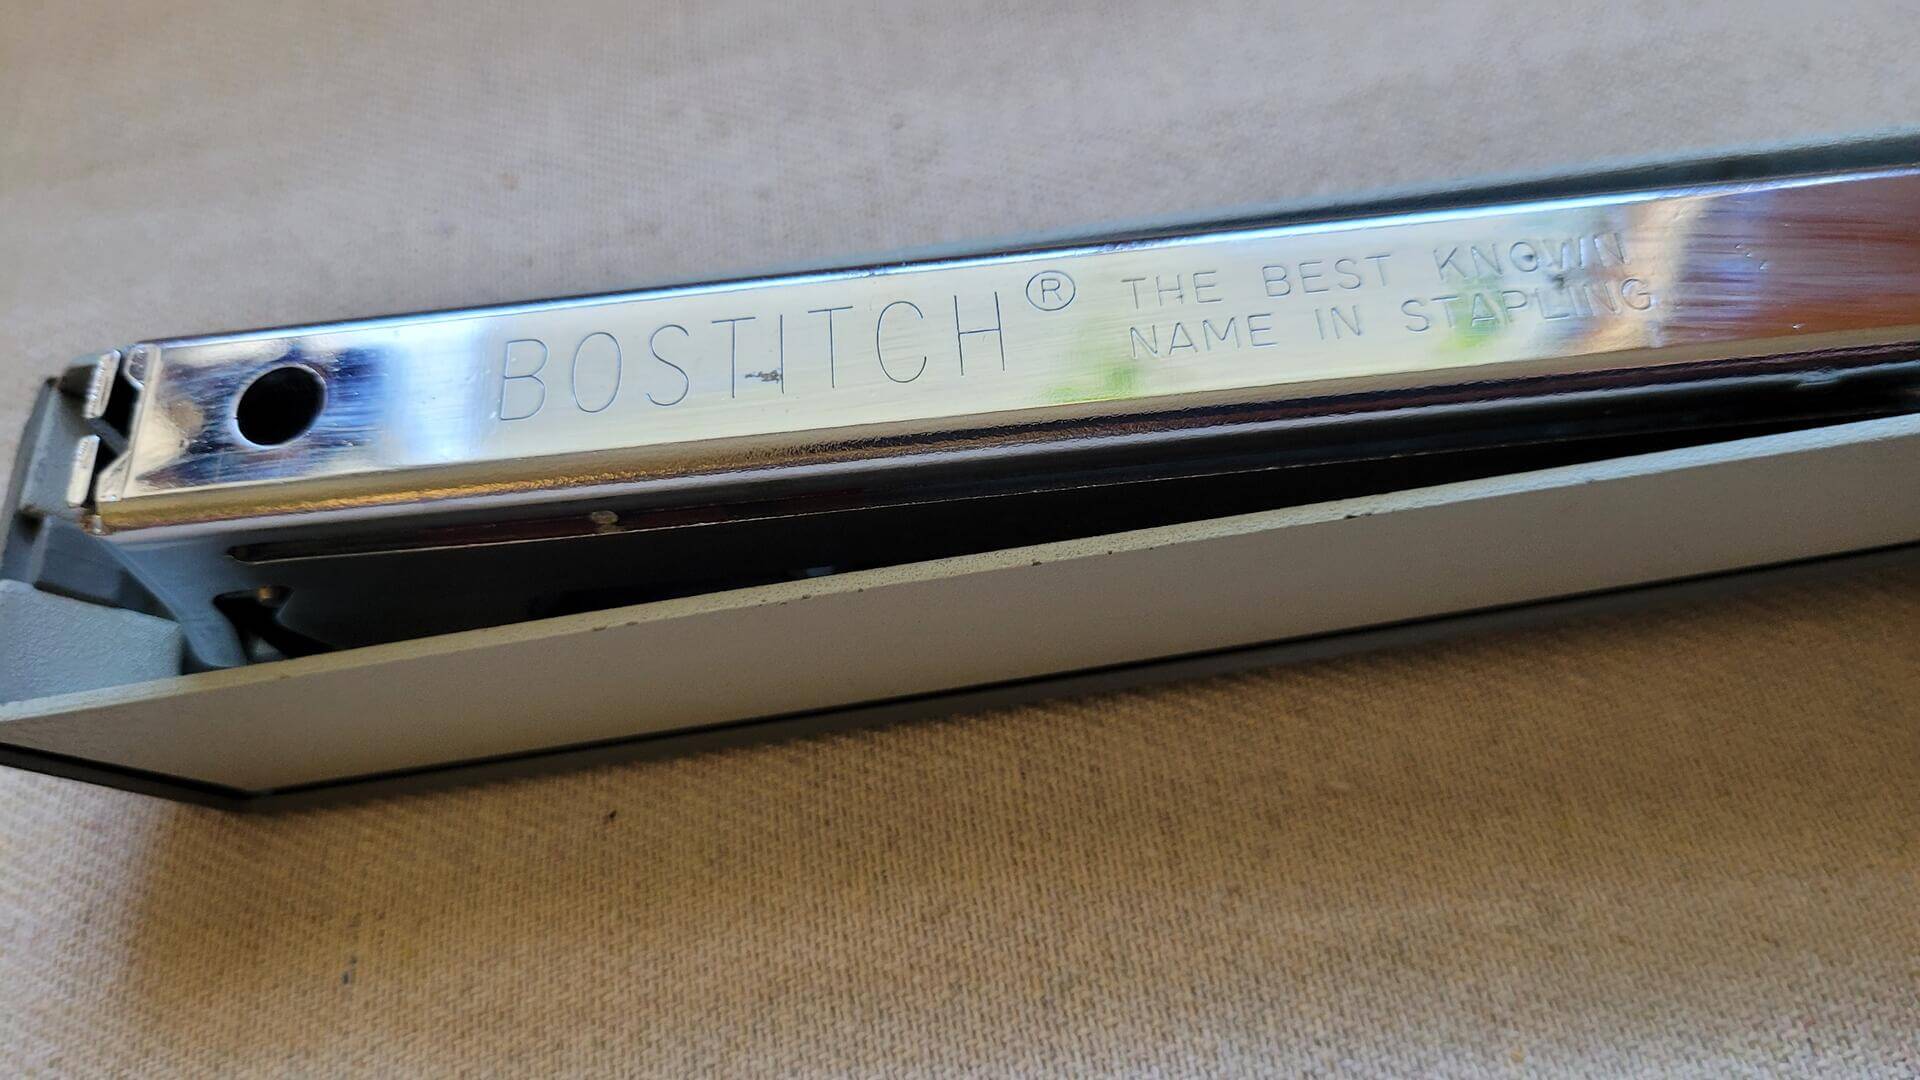 Vintage Bostitch Stapler Model B III Standard Paper Staples - Retro made in USA office tools and equipment collectibles